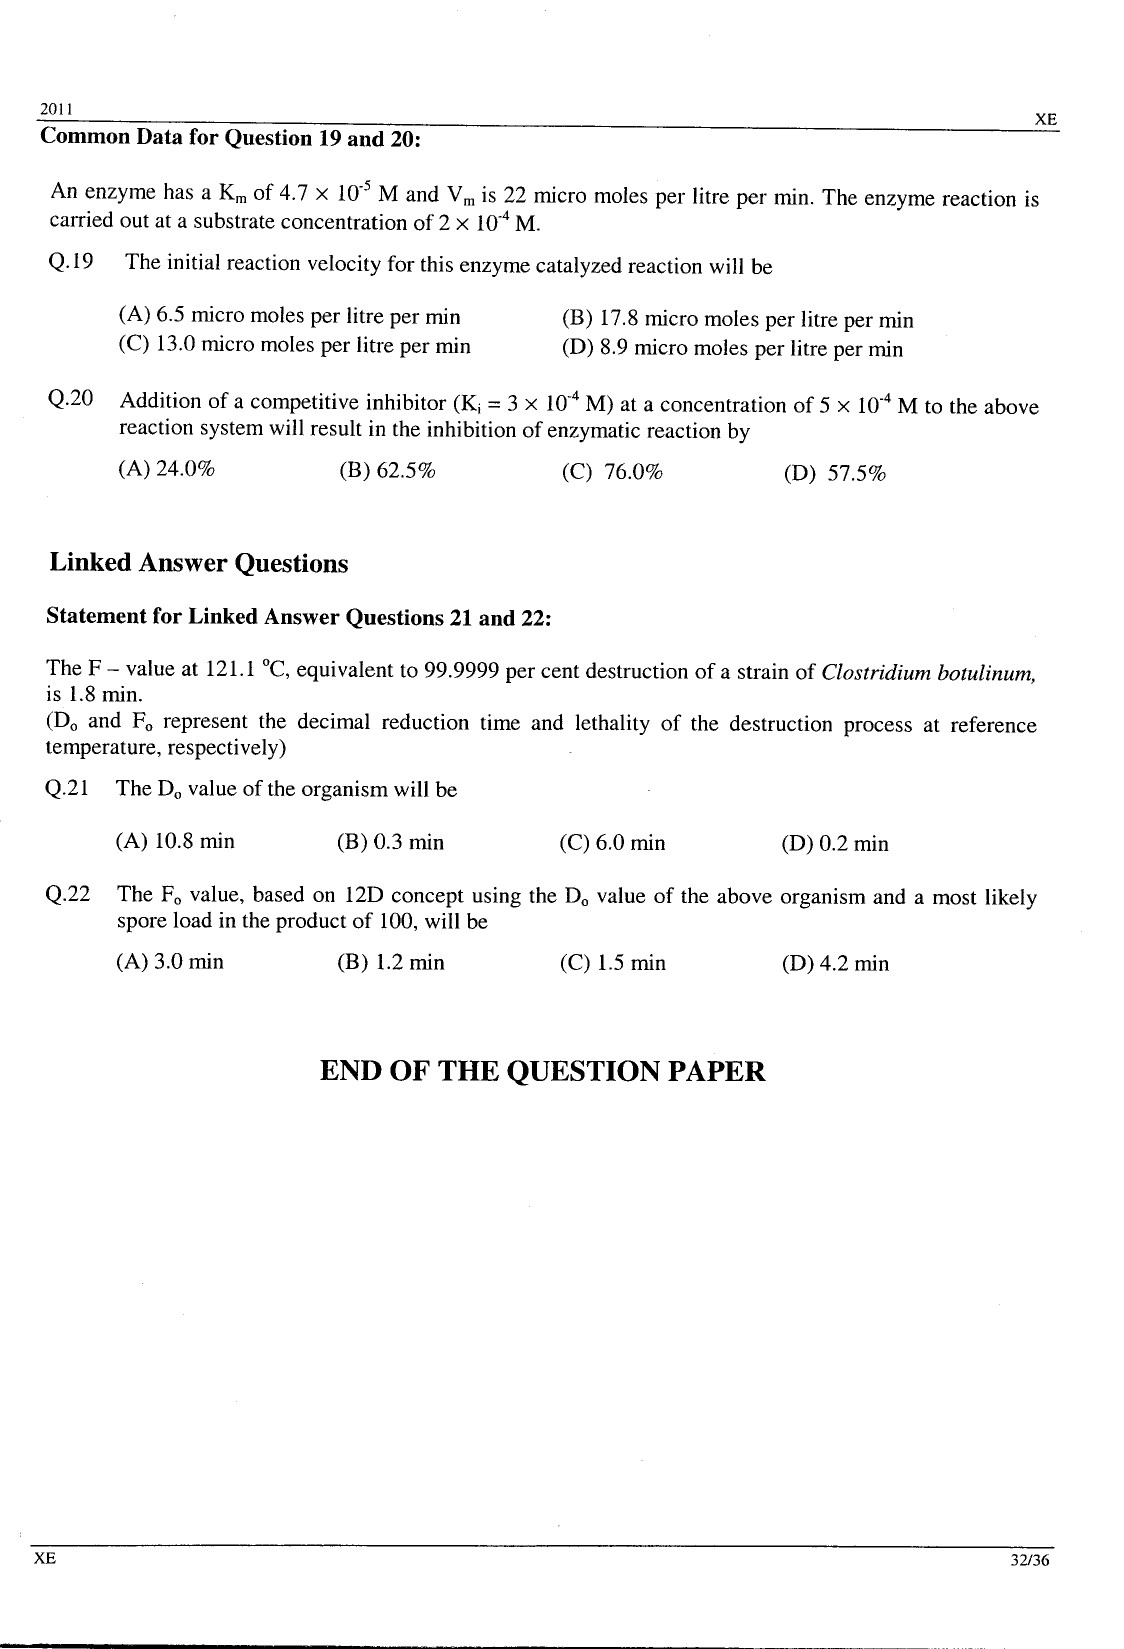 GATE Exam Question Paper 2011 Engineering Sciences 32